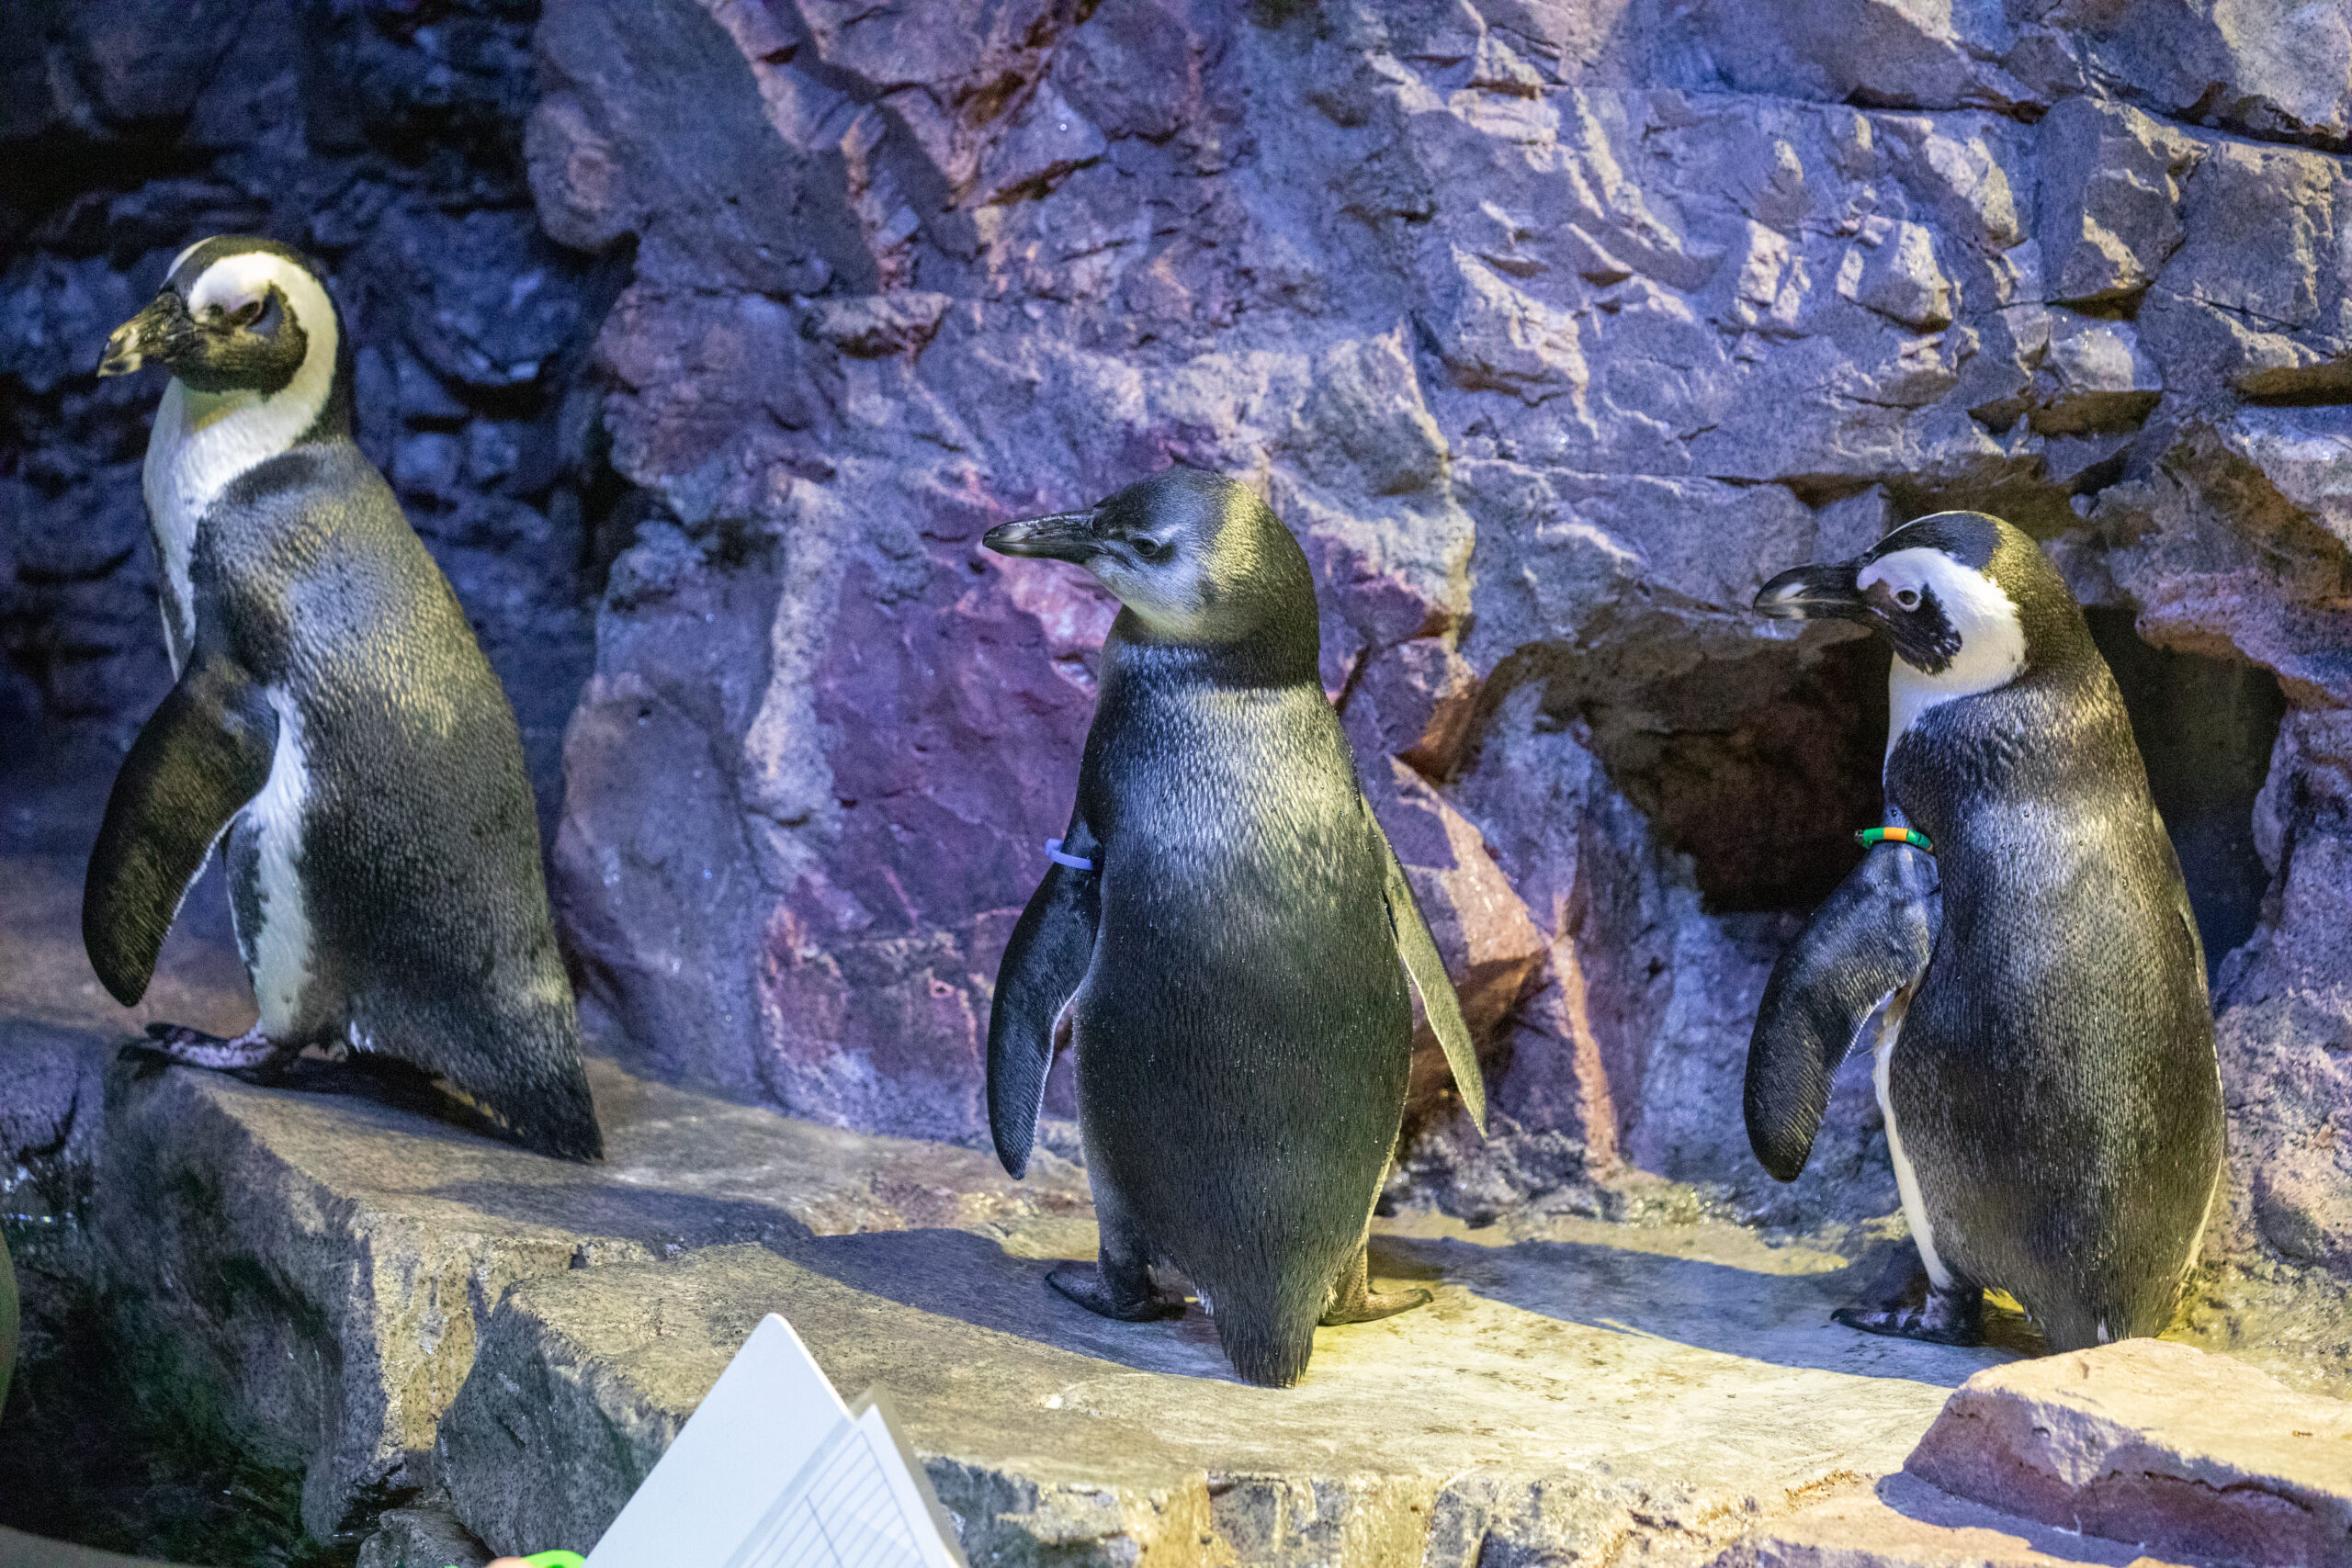 African penguin chick “FitzPatrick” (middle) joining the colony on exhibit.